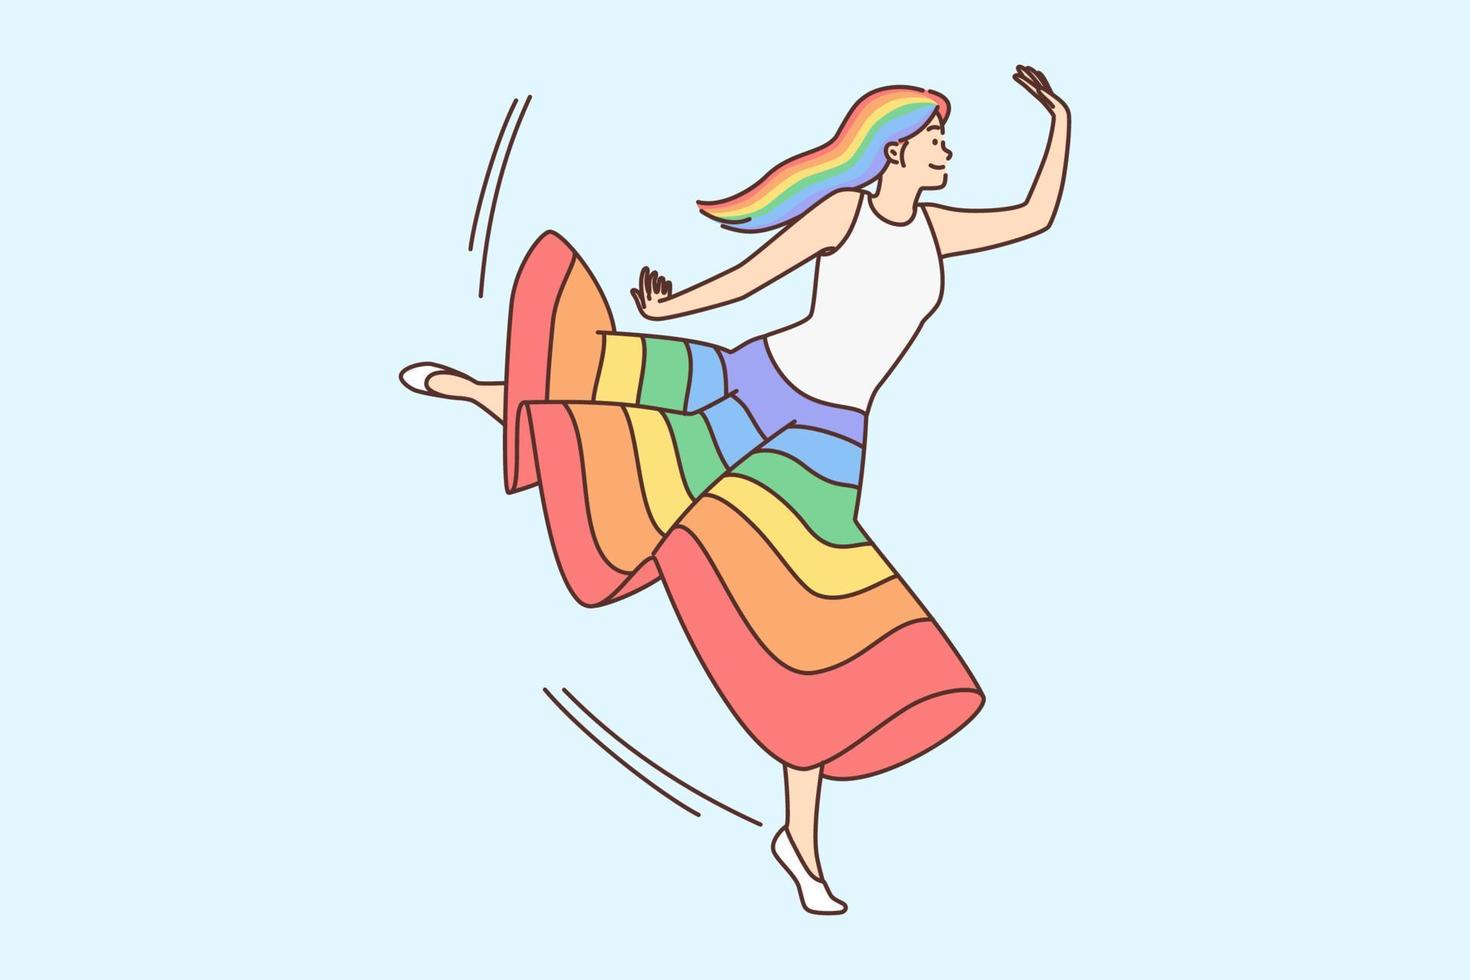 Smiling woman dancing in colorful skirt feeling optimistic and joyful. Happy girl with rainbow hair show concept of diversity and art. Vector illustration.